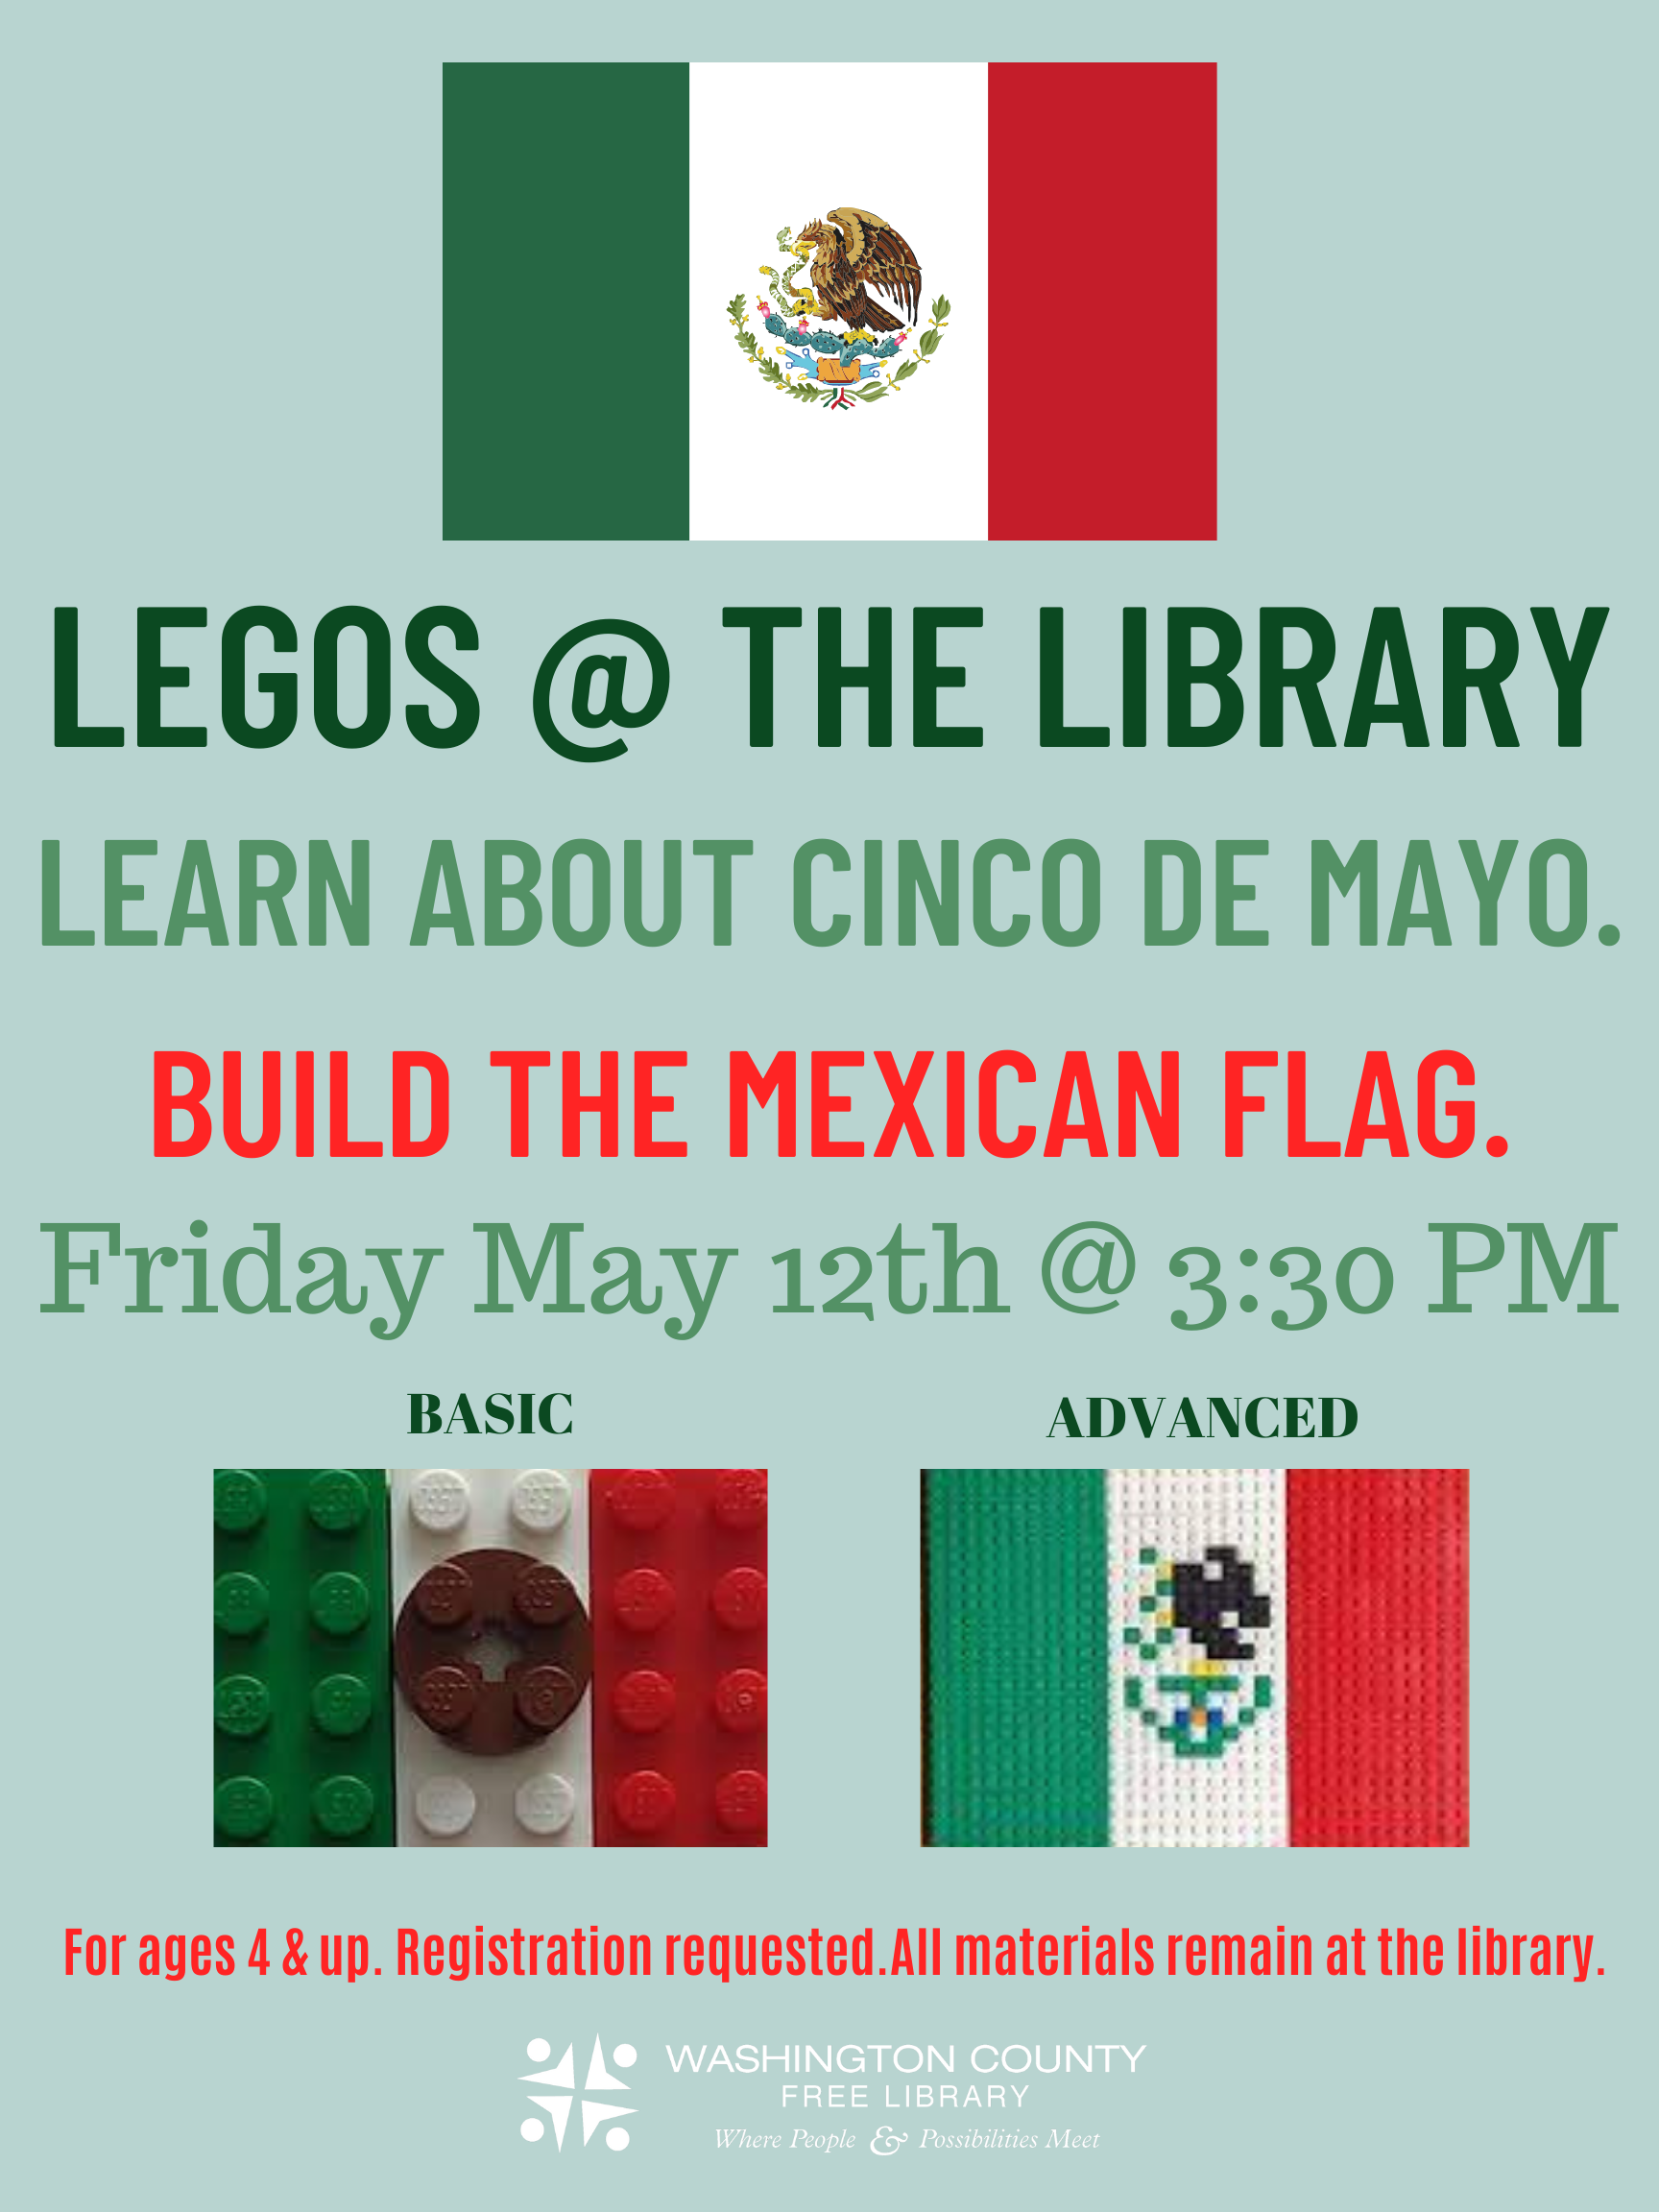 Legos at the Library: Build the Mexican Flag!